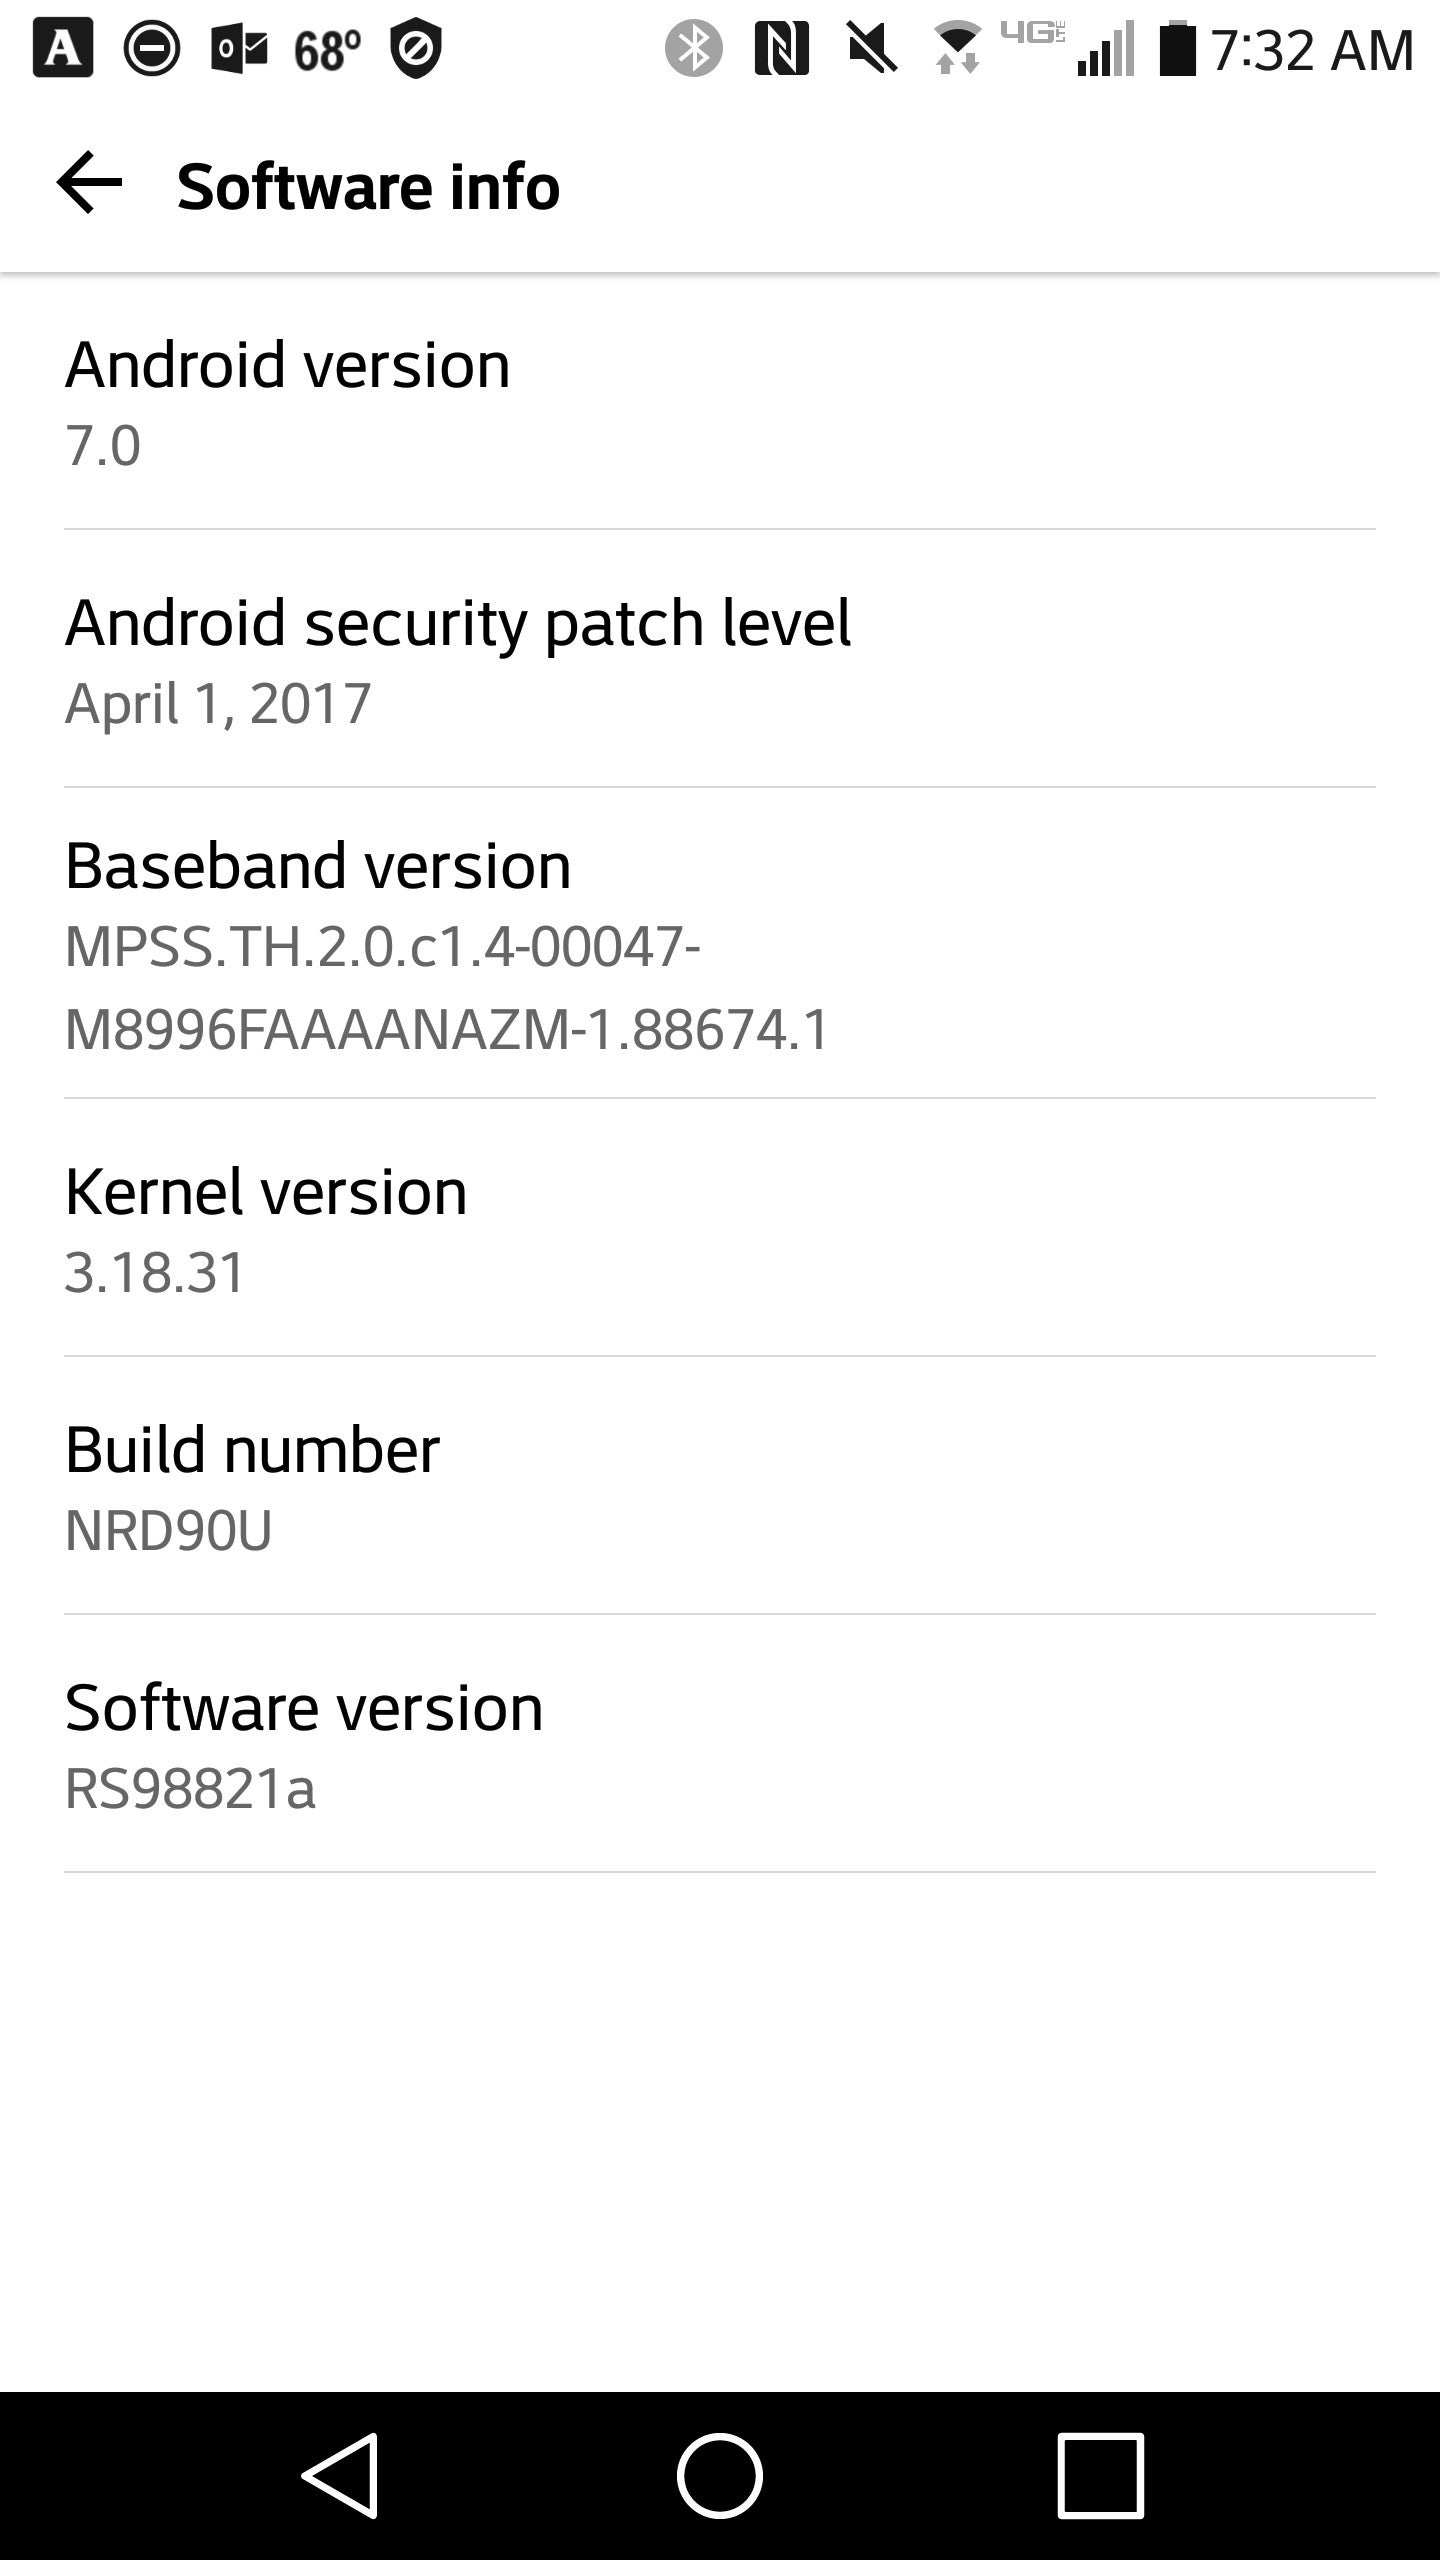 Unlocked LG G5 finally getting the Android 7.0 Nougat update in the US